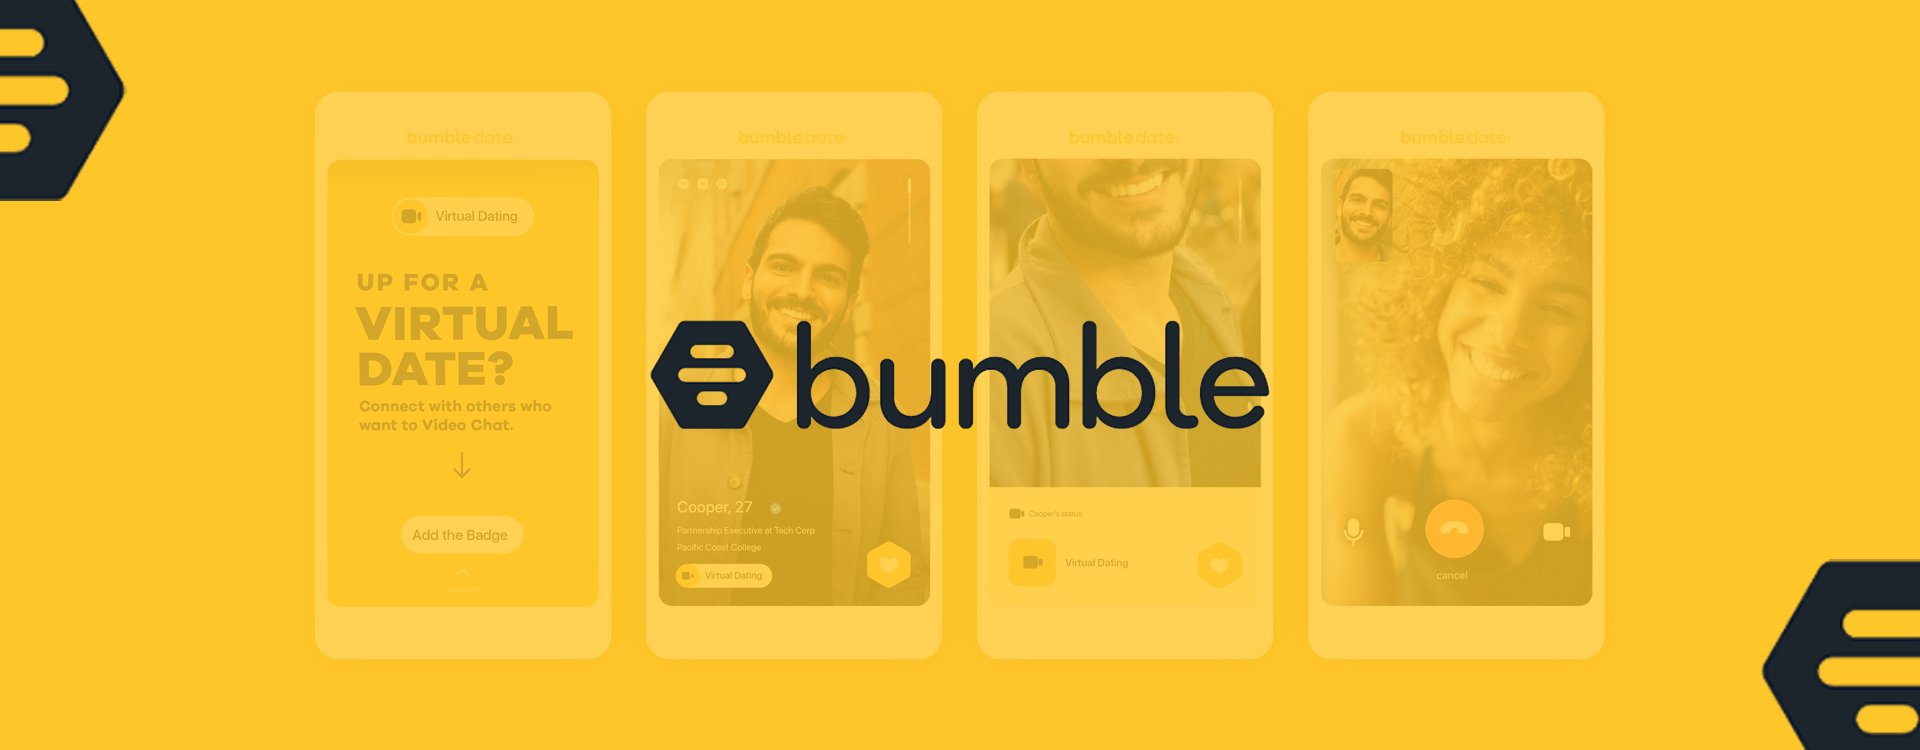 4 smartphones in background displaying user interface of Bumble app with the logo displayed upfront